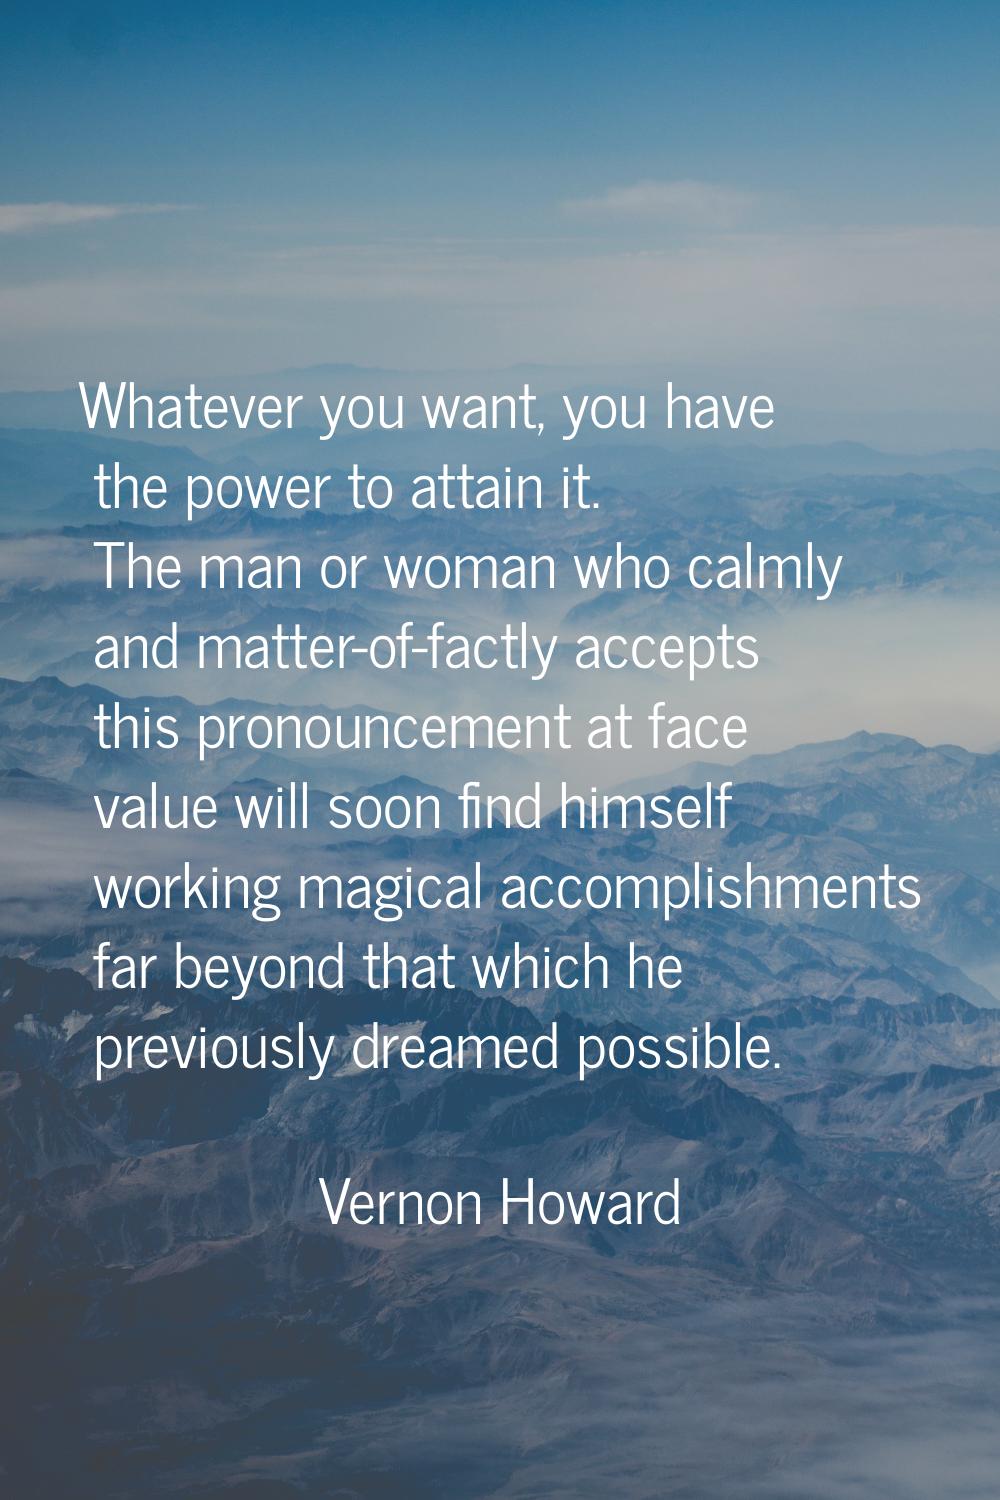 Whatever you want, you have the power to attain it. The man or woman who calmly and matter-of-factl